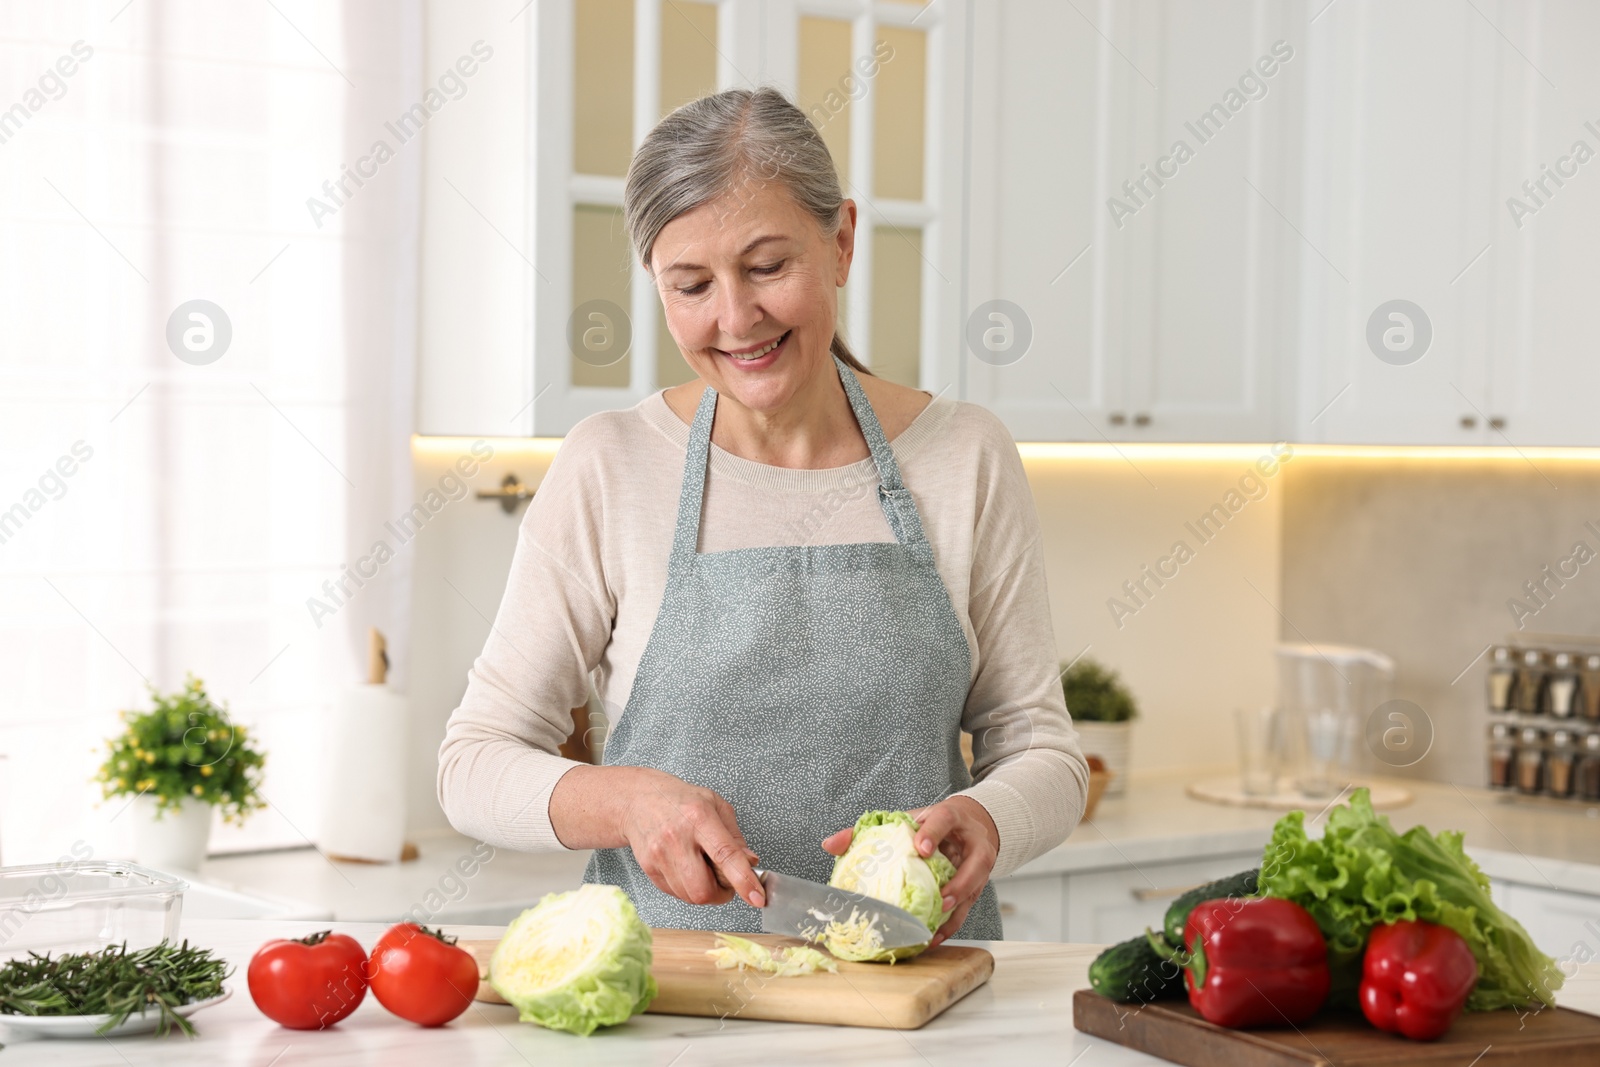 Photo of Happy housewife cutting cabbage at table in kitchen